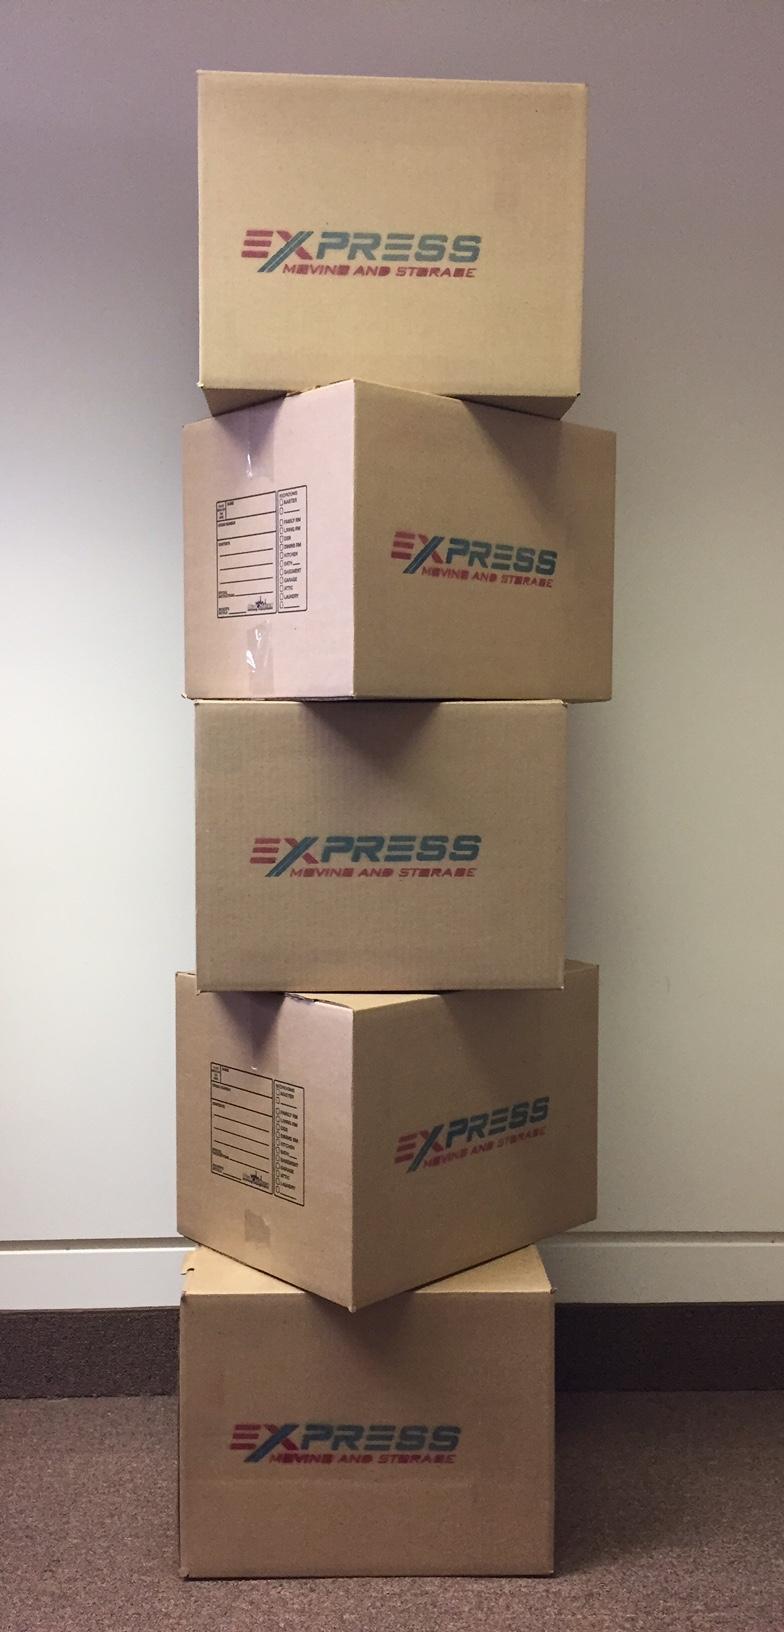 Use Express Moving and Storage for any size moving job, and receive 10% off all packing materials for the month of March!